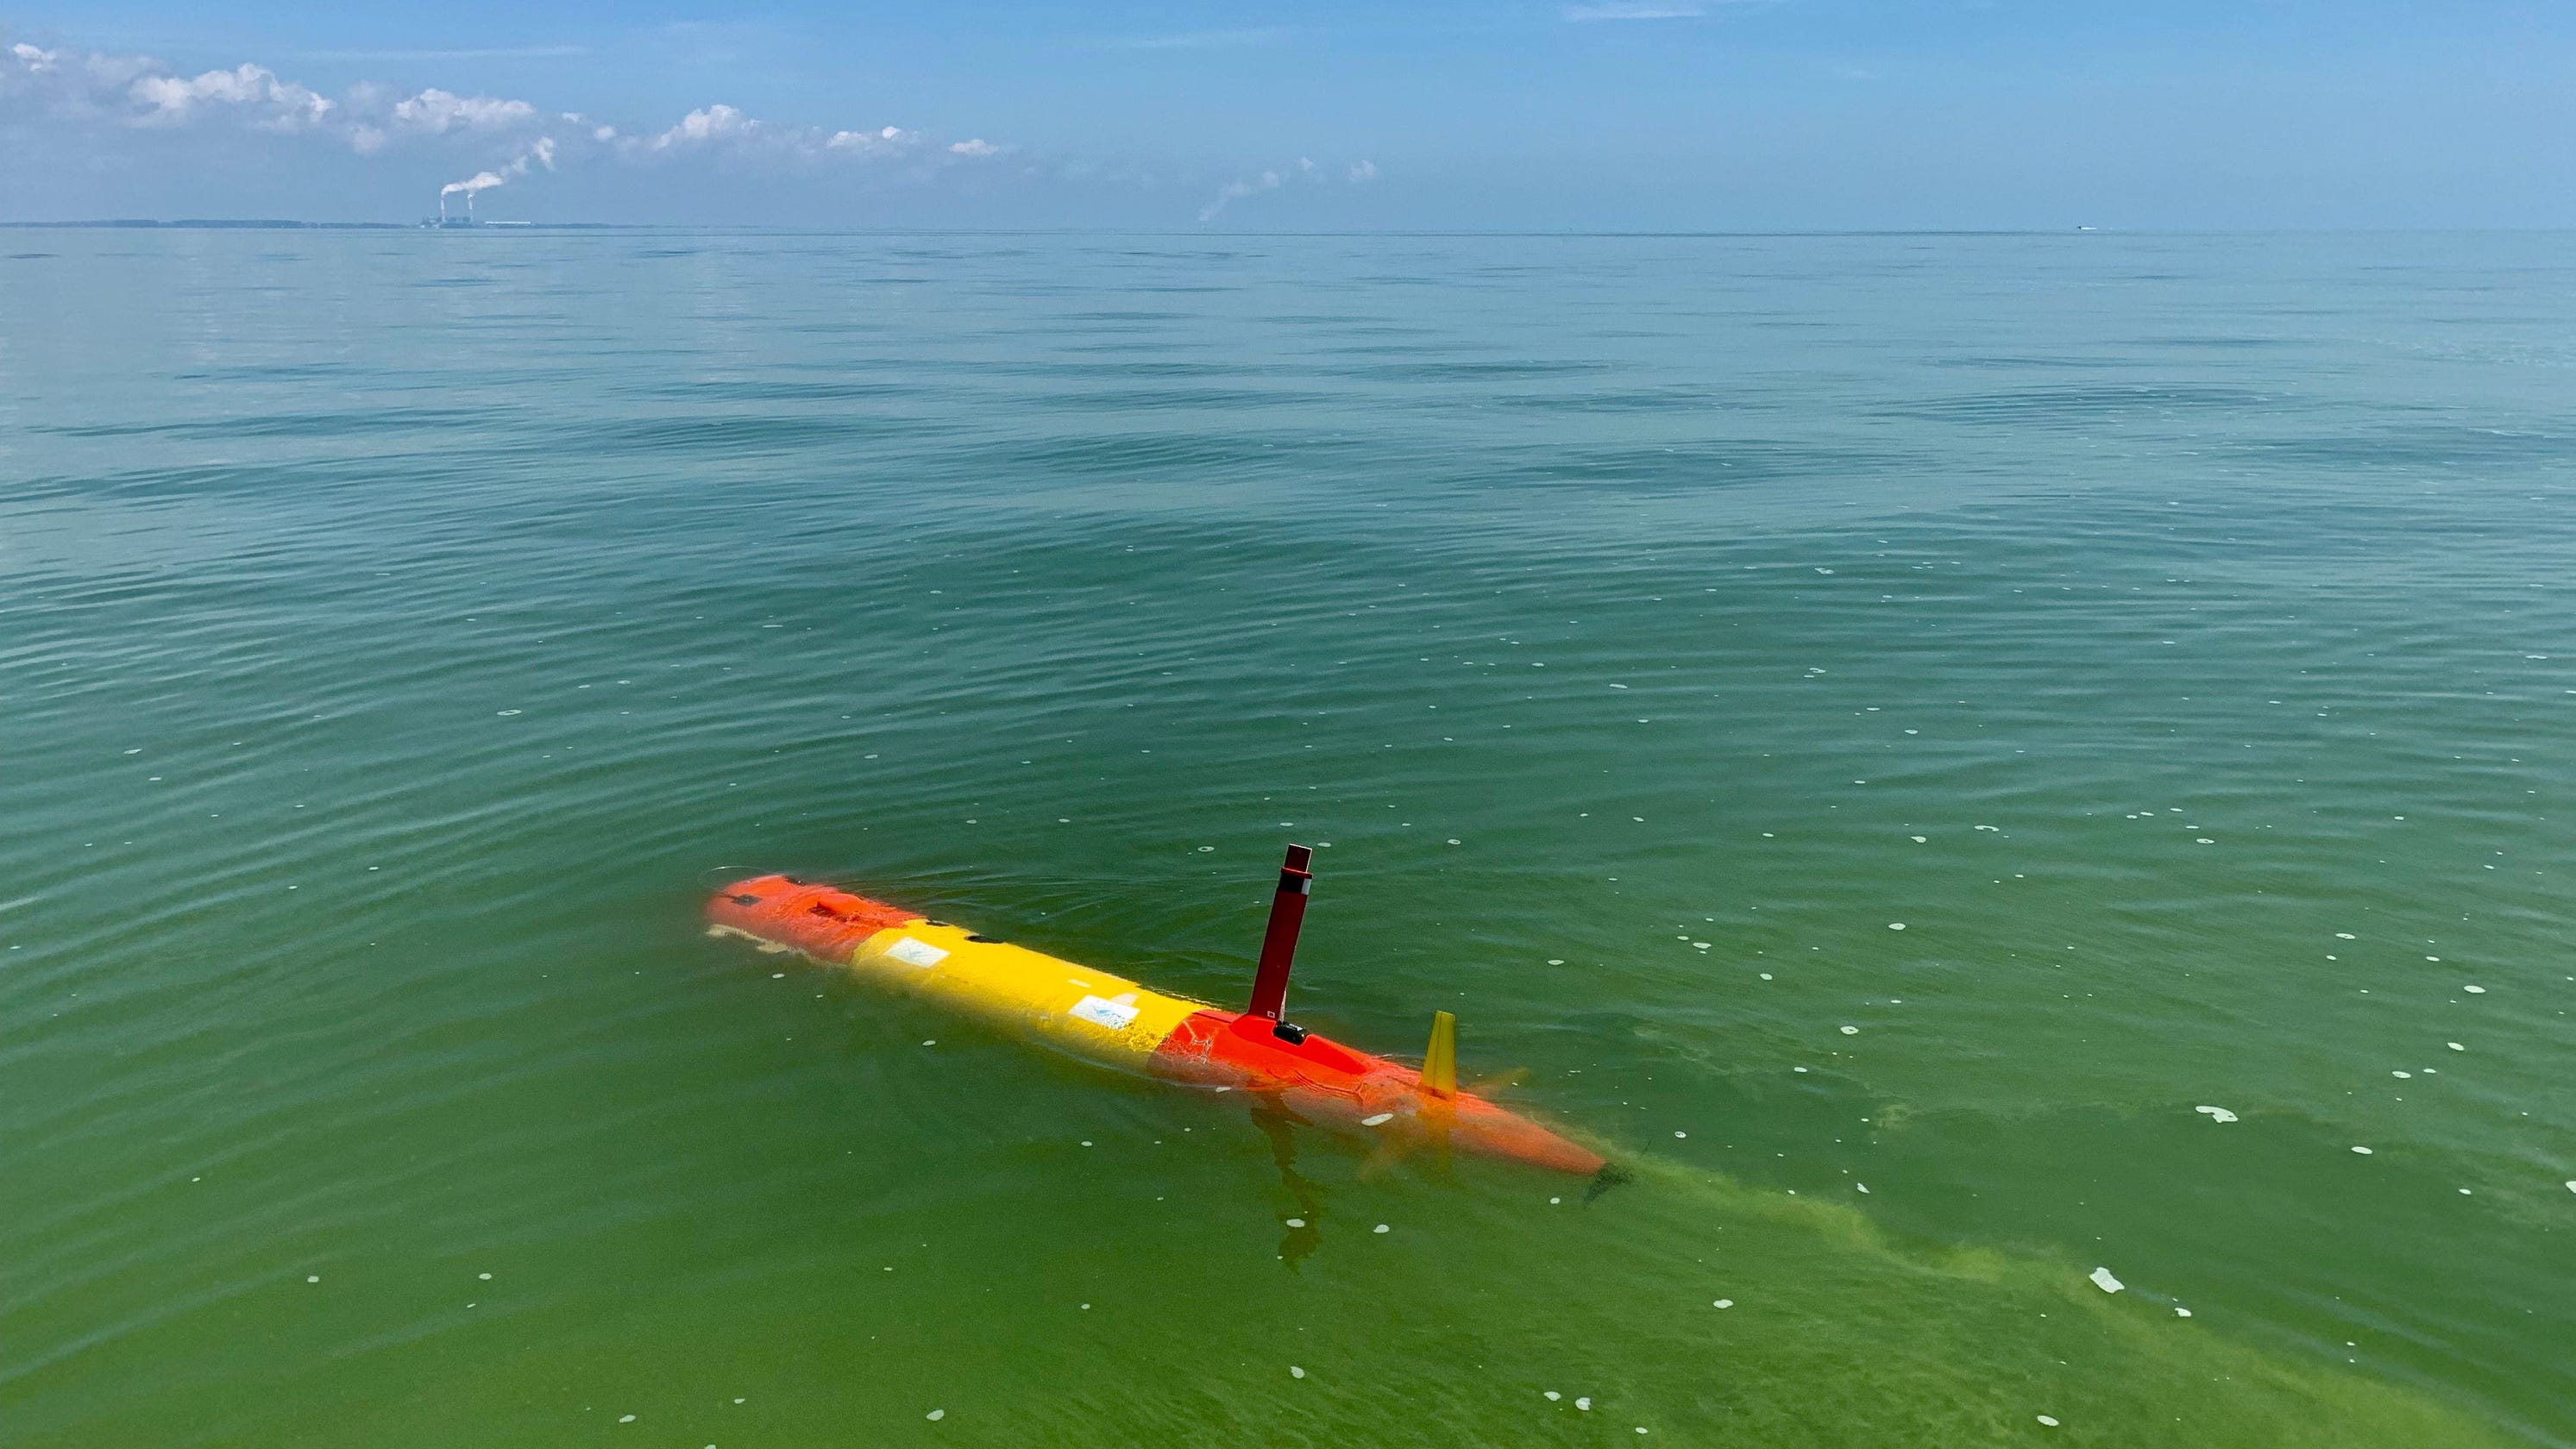 Lake Erie S Severe Algal Bloom In 2019 Stirs Worries About 2020